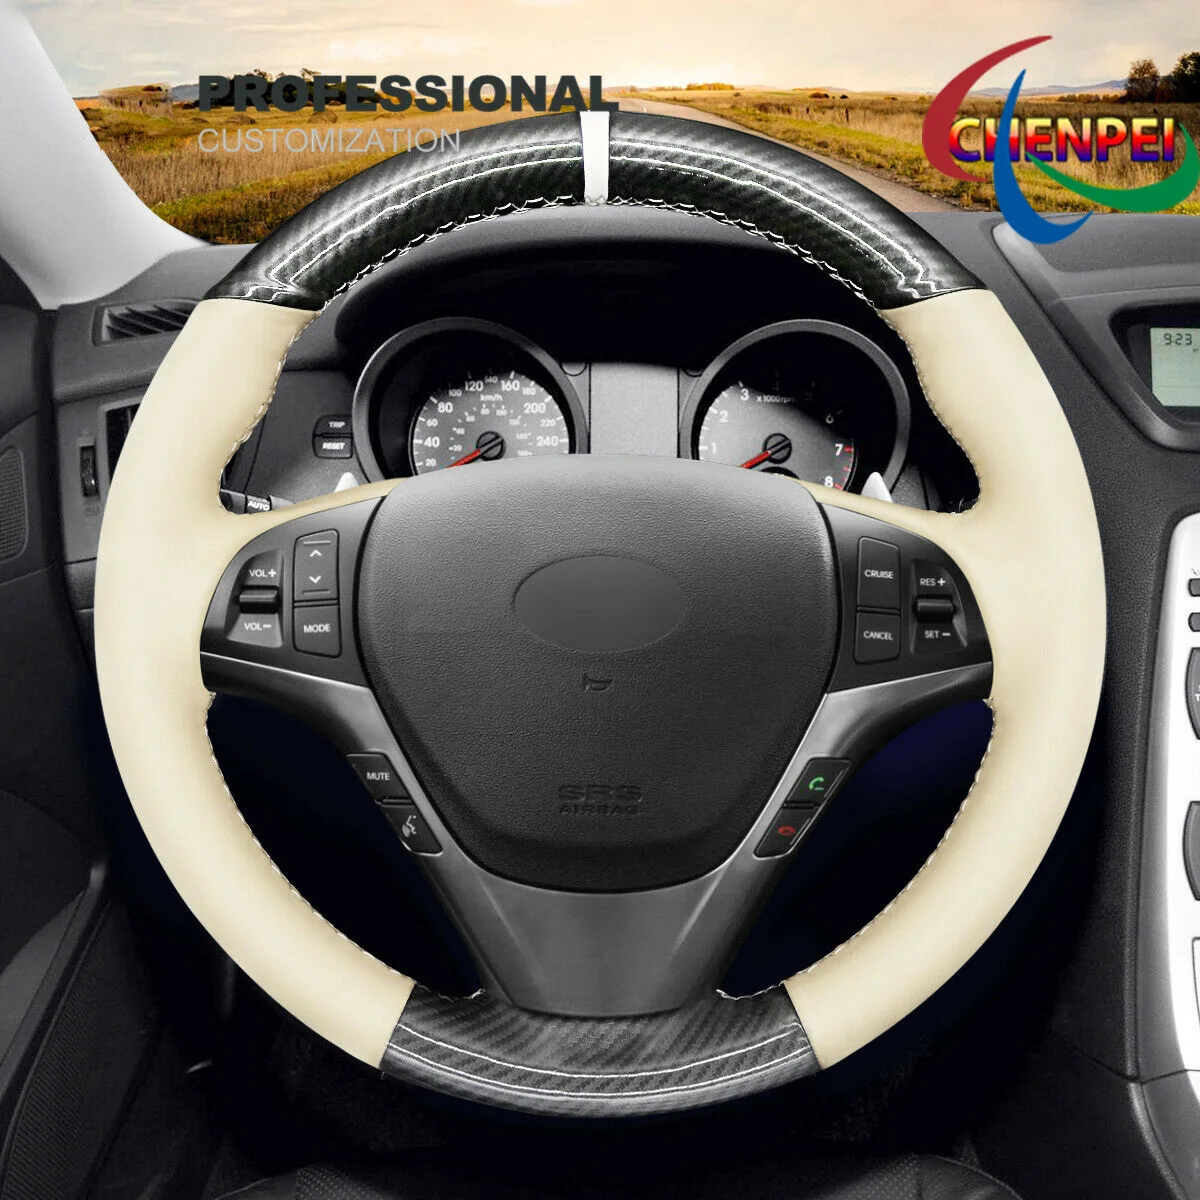 

DIY Hand-Sewn Carbon Fiber Beige Leather Car Steering Wheel Cover For Hyundai Genesis Coupe Car Interior Accessories